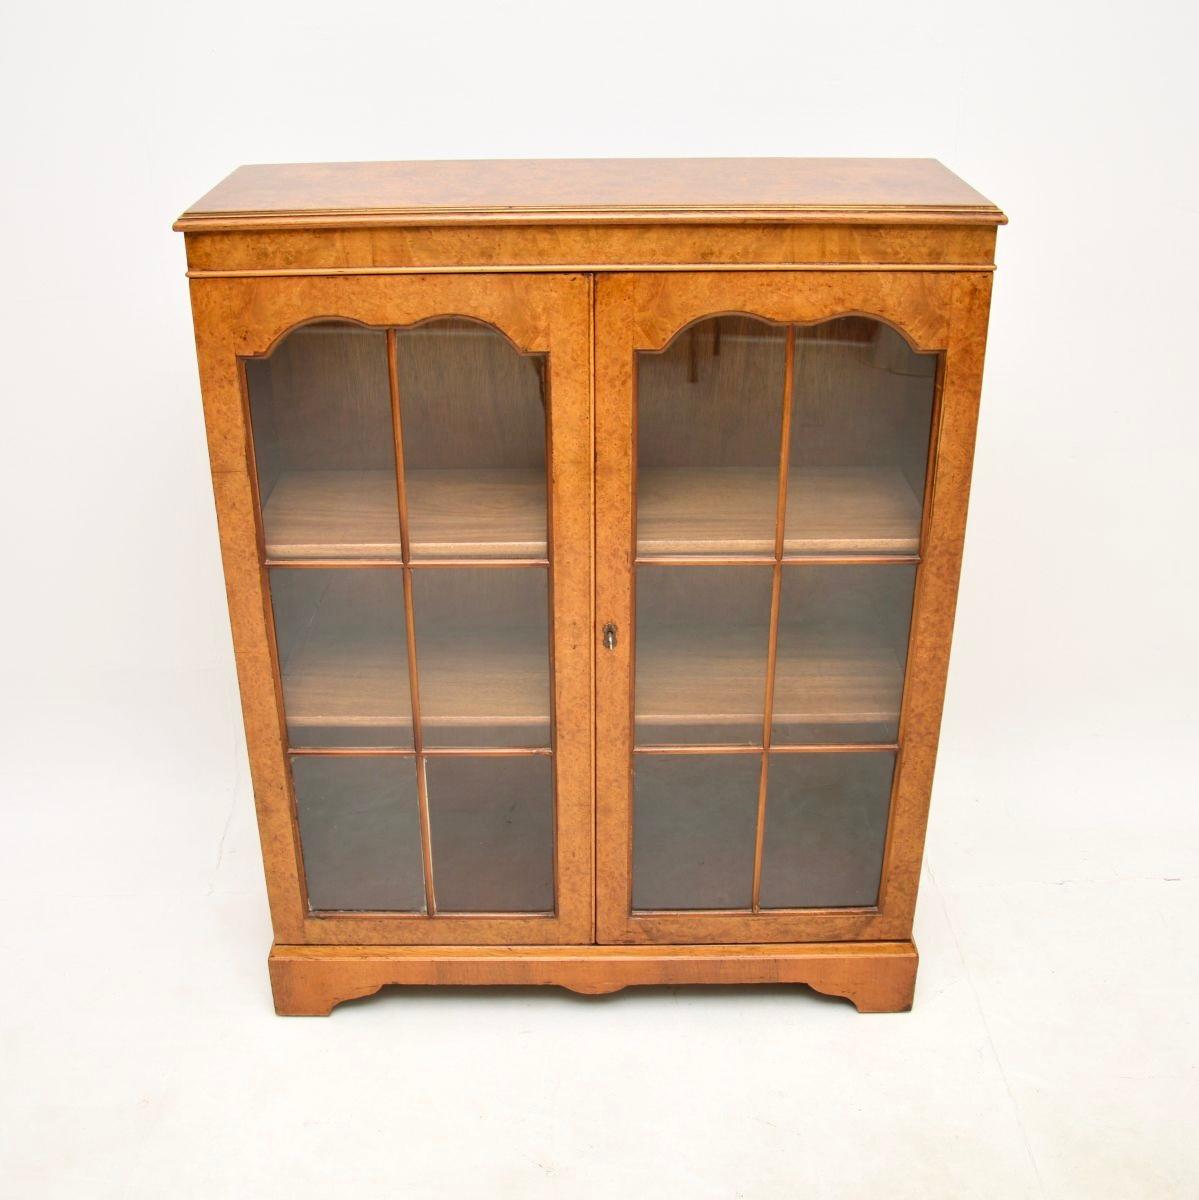 A smart and very well made antique burr walnut bookcase. This was made in England, it dates from around the 1930’s.

The quality is superb, this has stunning burr walnut grain patterns and a gorgeous mellow colour tone. The astral glazed glass